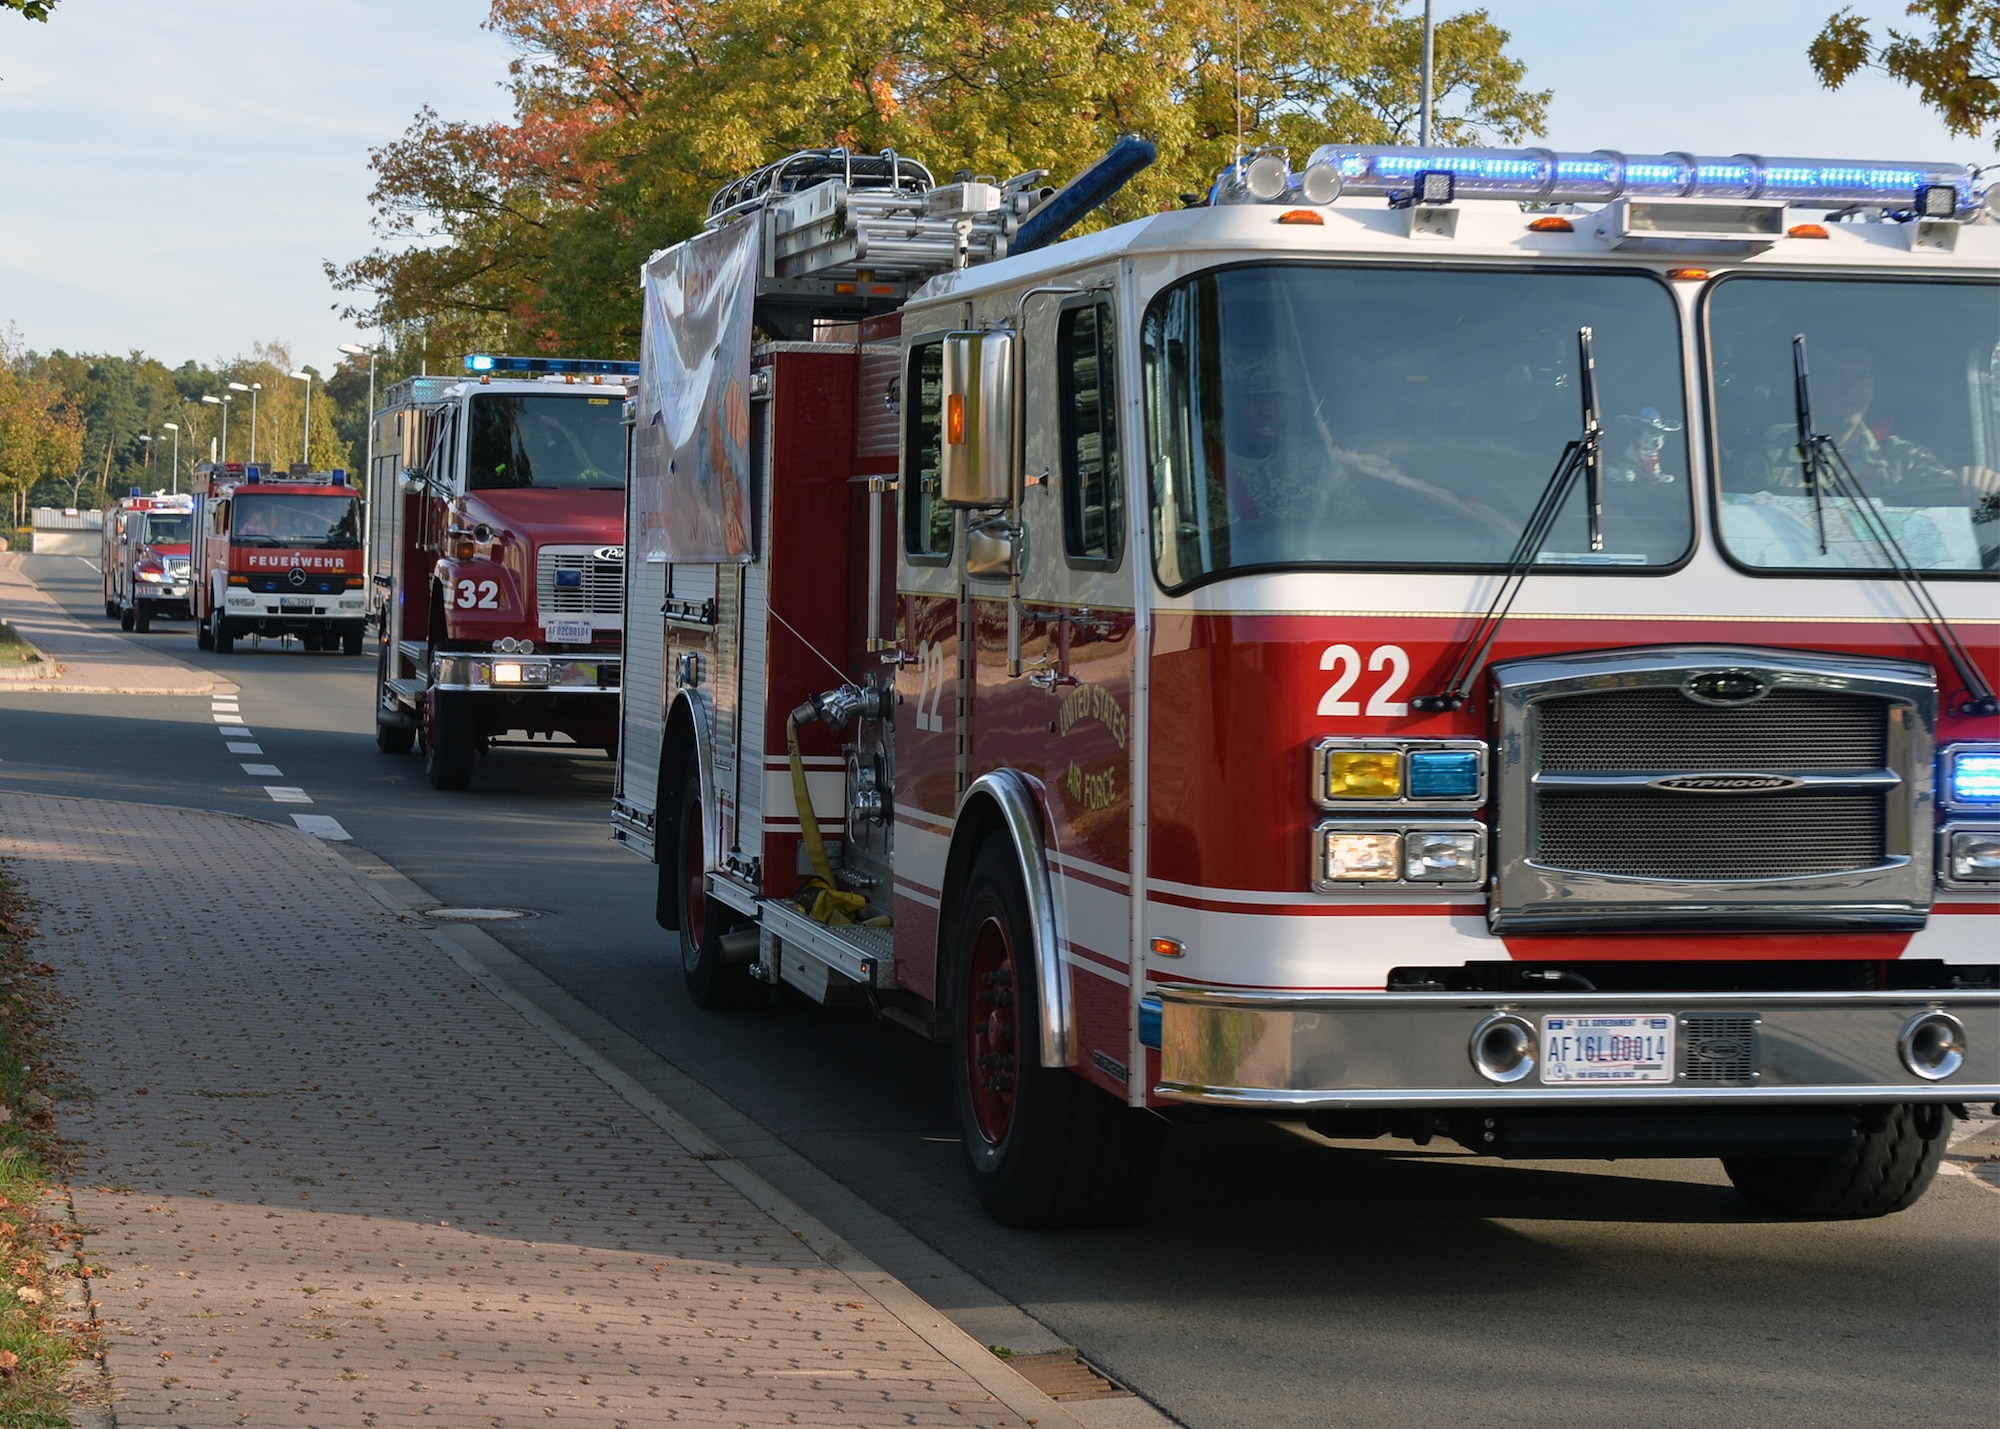 Firefighters from the Kaiserslautern Military Community Fire and Emergency Services drive fire trucks by base housing on Ramstein Air Base, Germany, Oct. 6, 2018. Fire trucks were part of a parade to kick off Fire Prevention Week on Ramstein, observed from Oct. 7 - 13. (U.S. Air Force photo by Staff Sgt. Jimmie D. Pike)